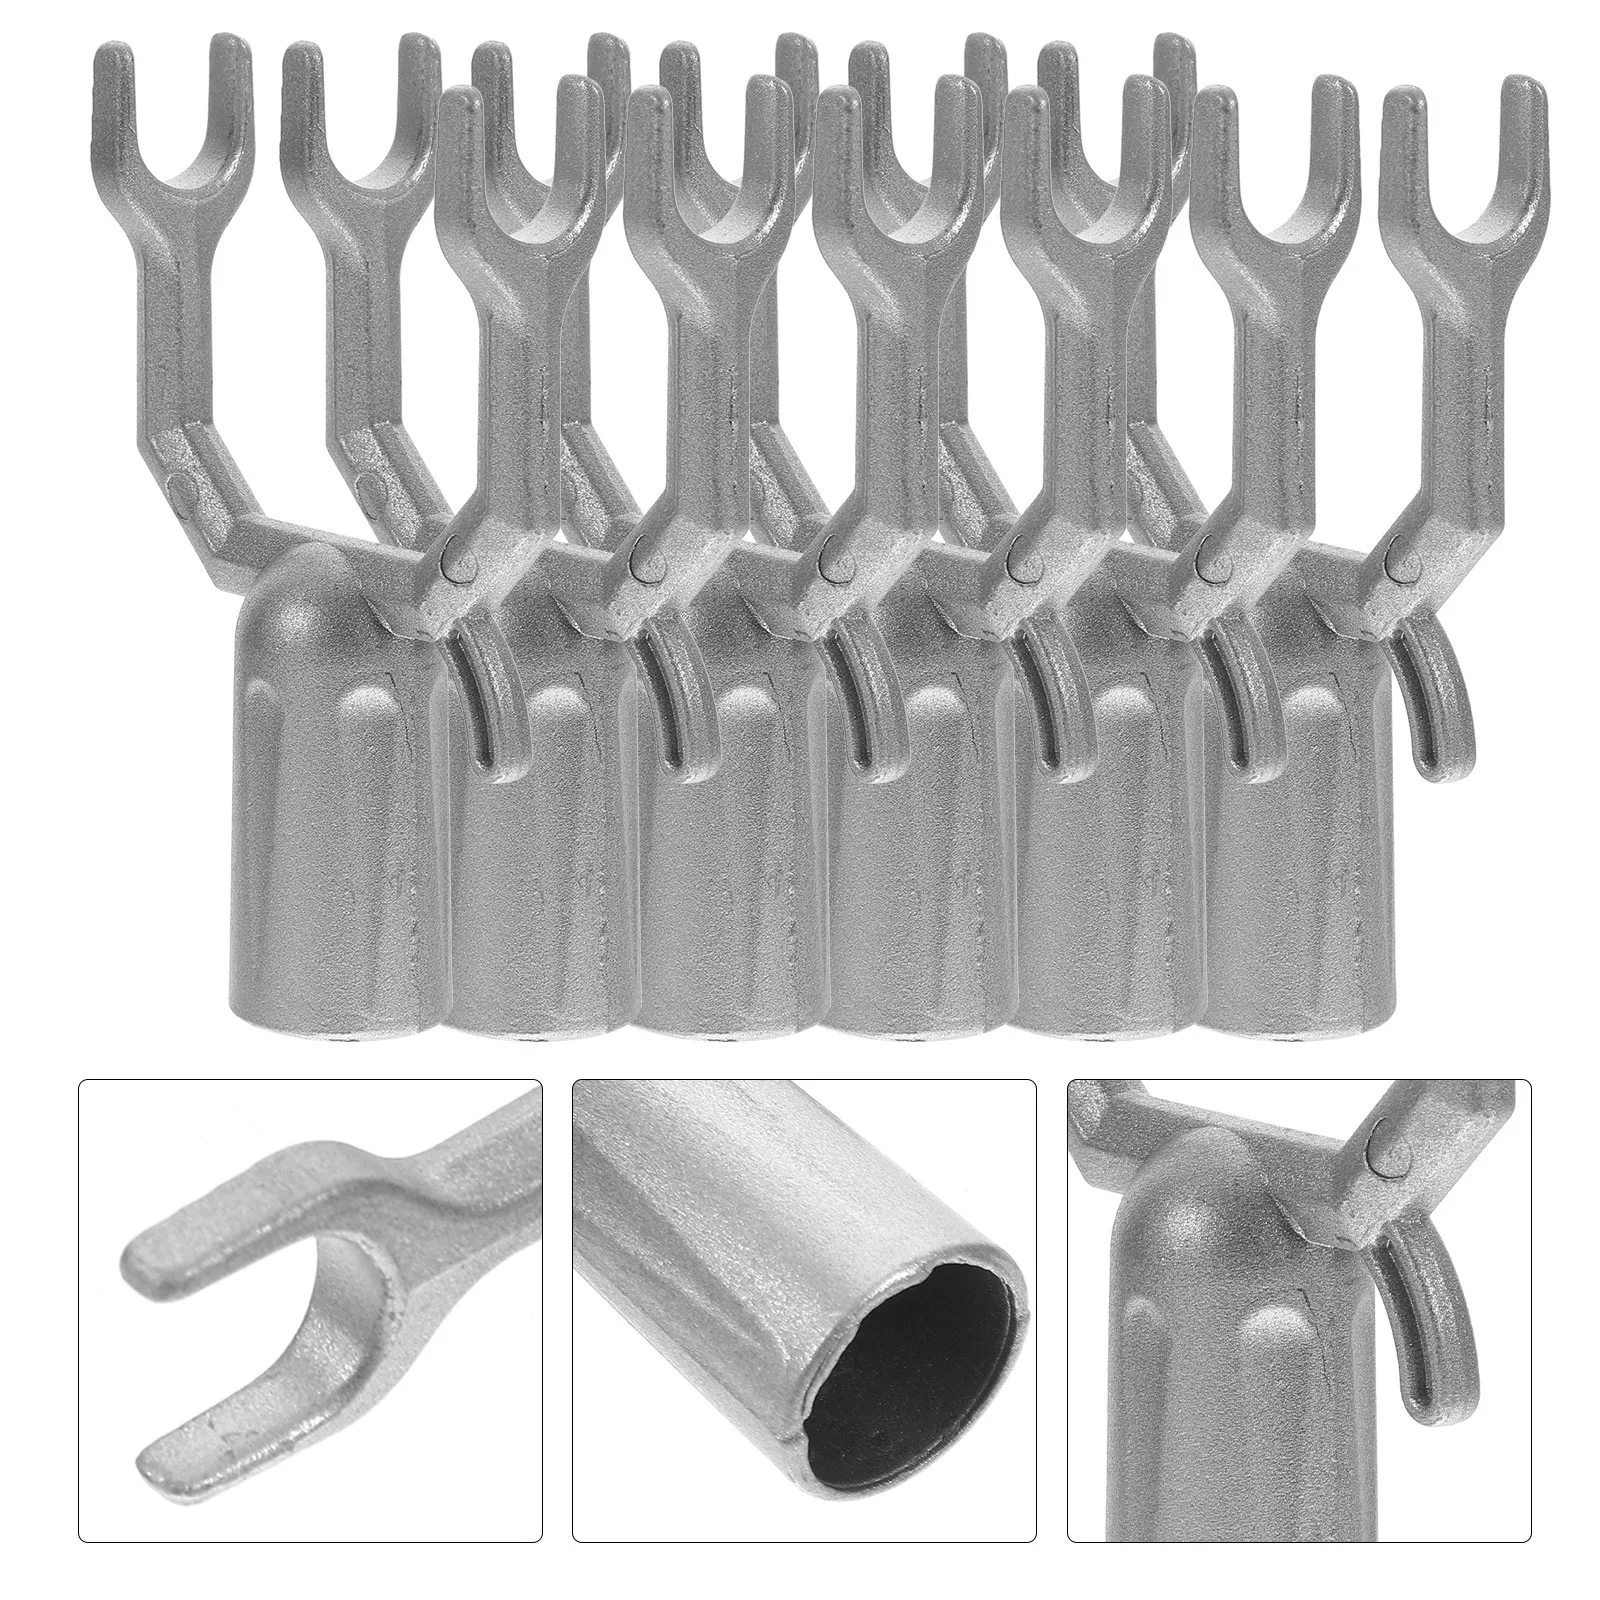 

Tree Support Branch Crutch Stakes Fruit Metal Supports Device Straightening Kit Leaning Garden Fruited Holder Tool Forks Pole